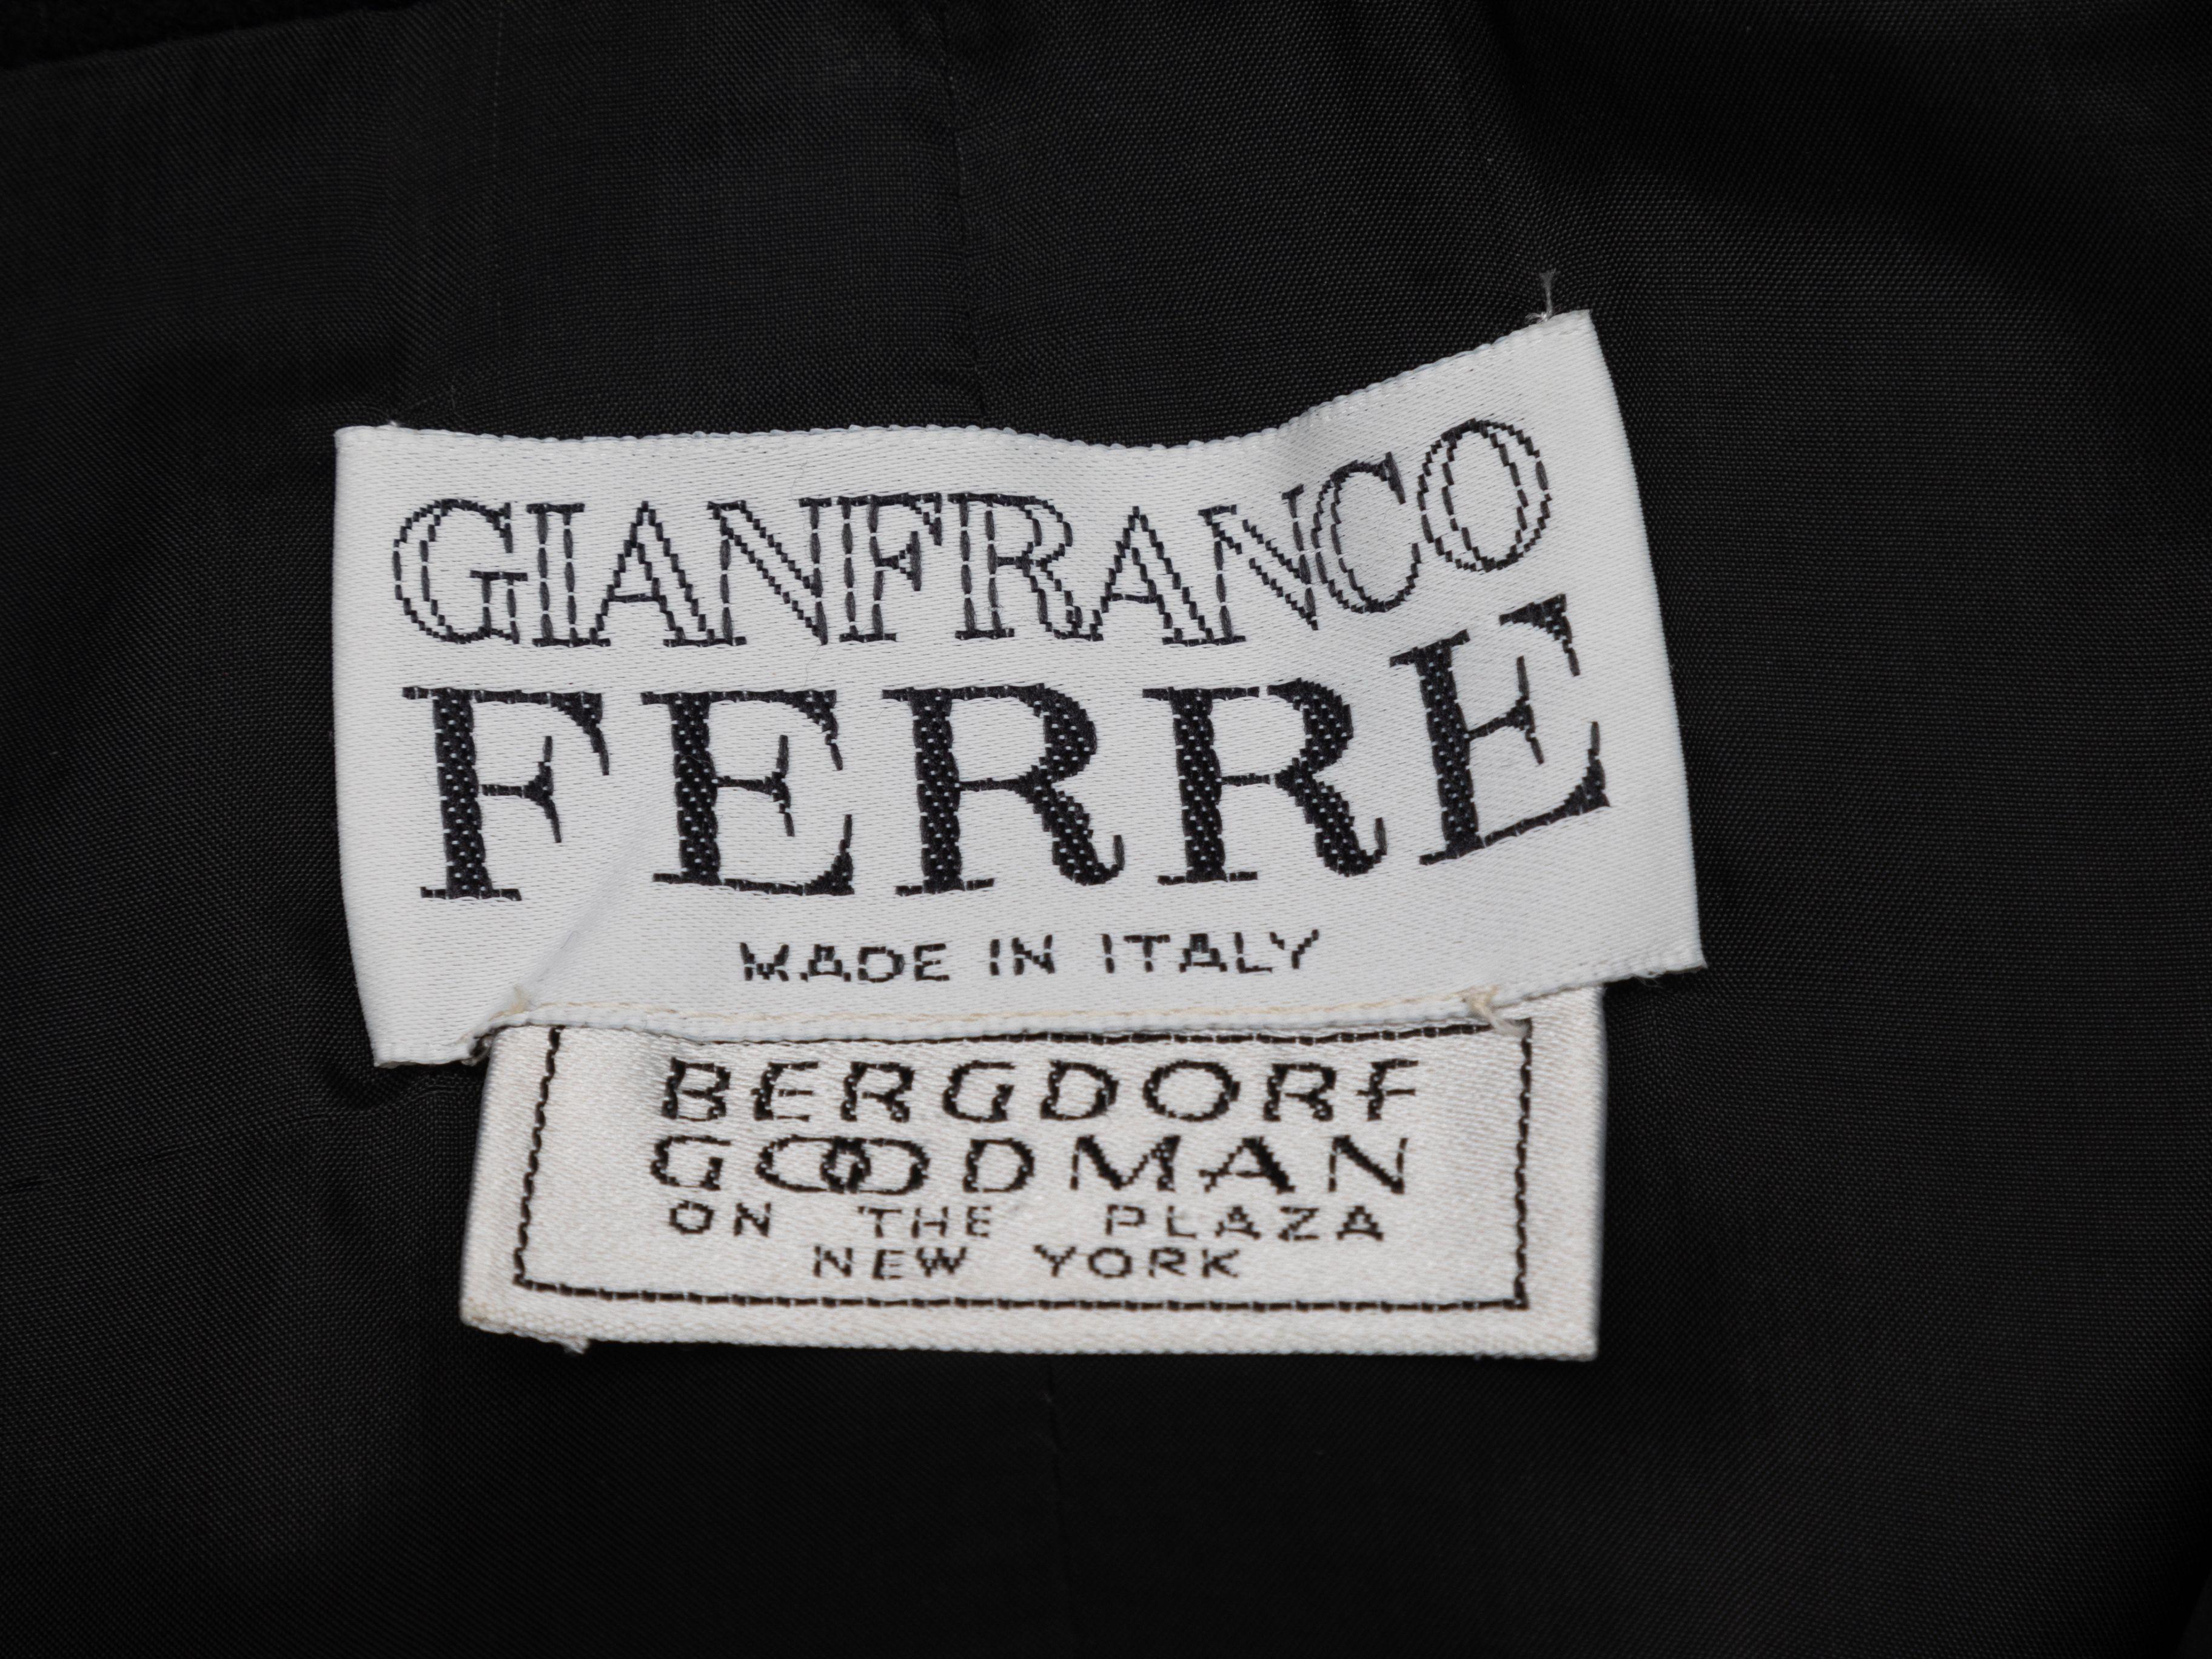 Product Details: Vintage black wool jacket by Gianfranco Ferre. Shawl collar. Button closures at center front. 40